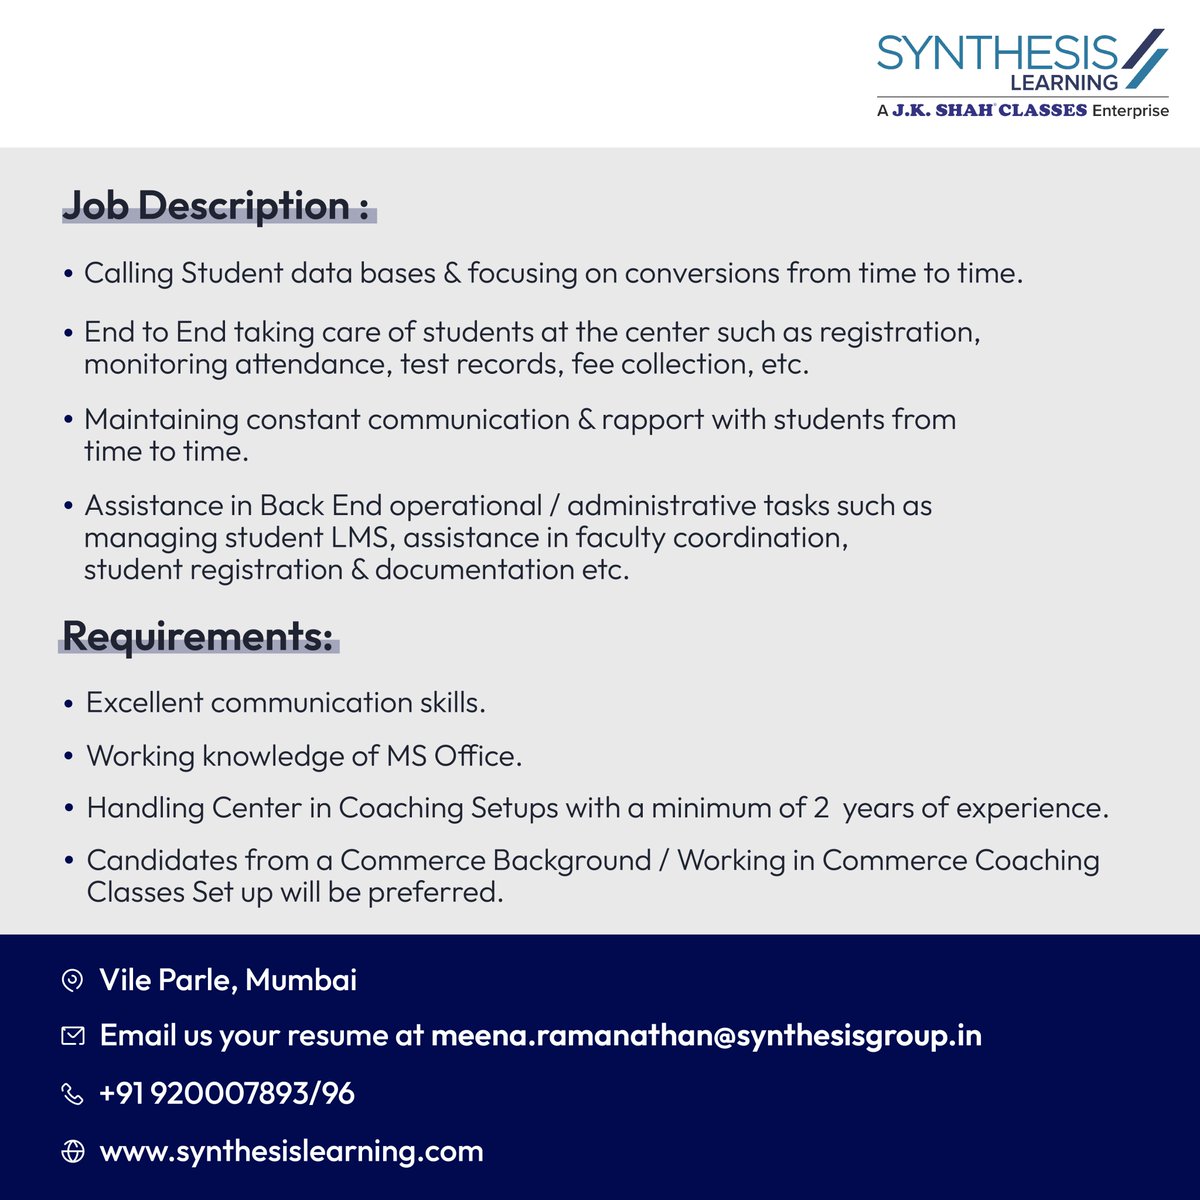 🚨#WeAreHiring!
Are you someone looking to make a career in the Education industry? Then we're looking for you!
📧 Send us your resume at meena.ramanathan@synthesisgroup.in!

#Hiring #HiringAlert #JobOpenings #ContentWriter #ACCA #ACCAGlobal #FutureProfessionals #ACCAIndia